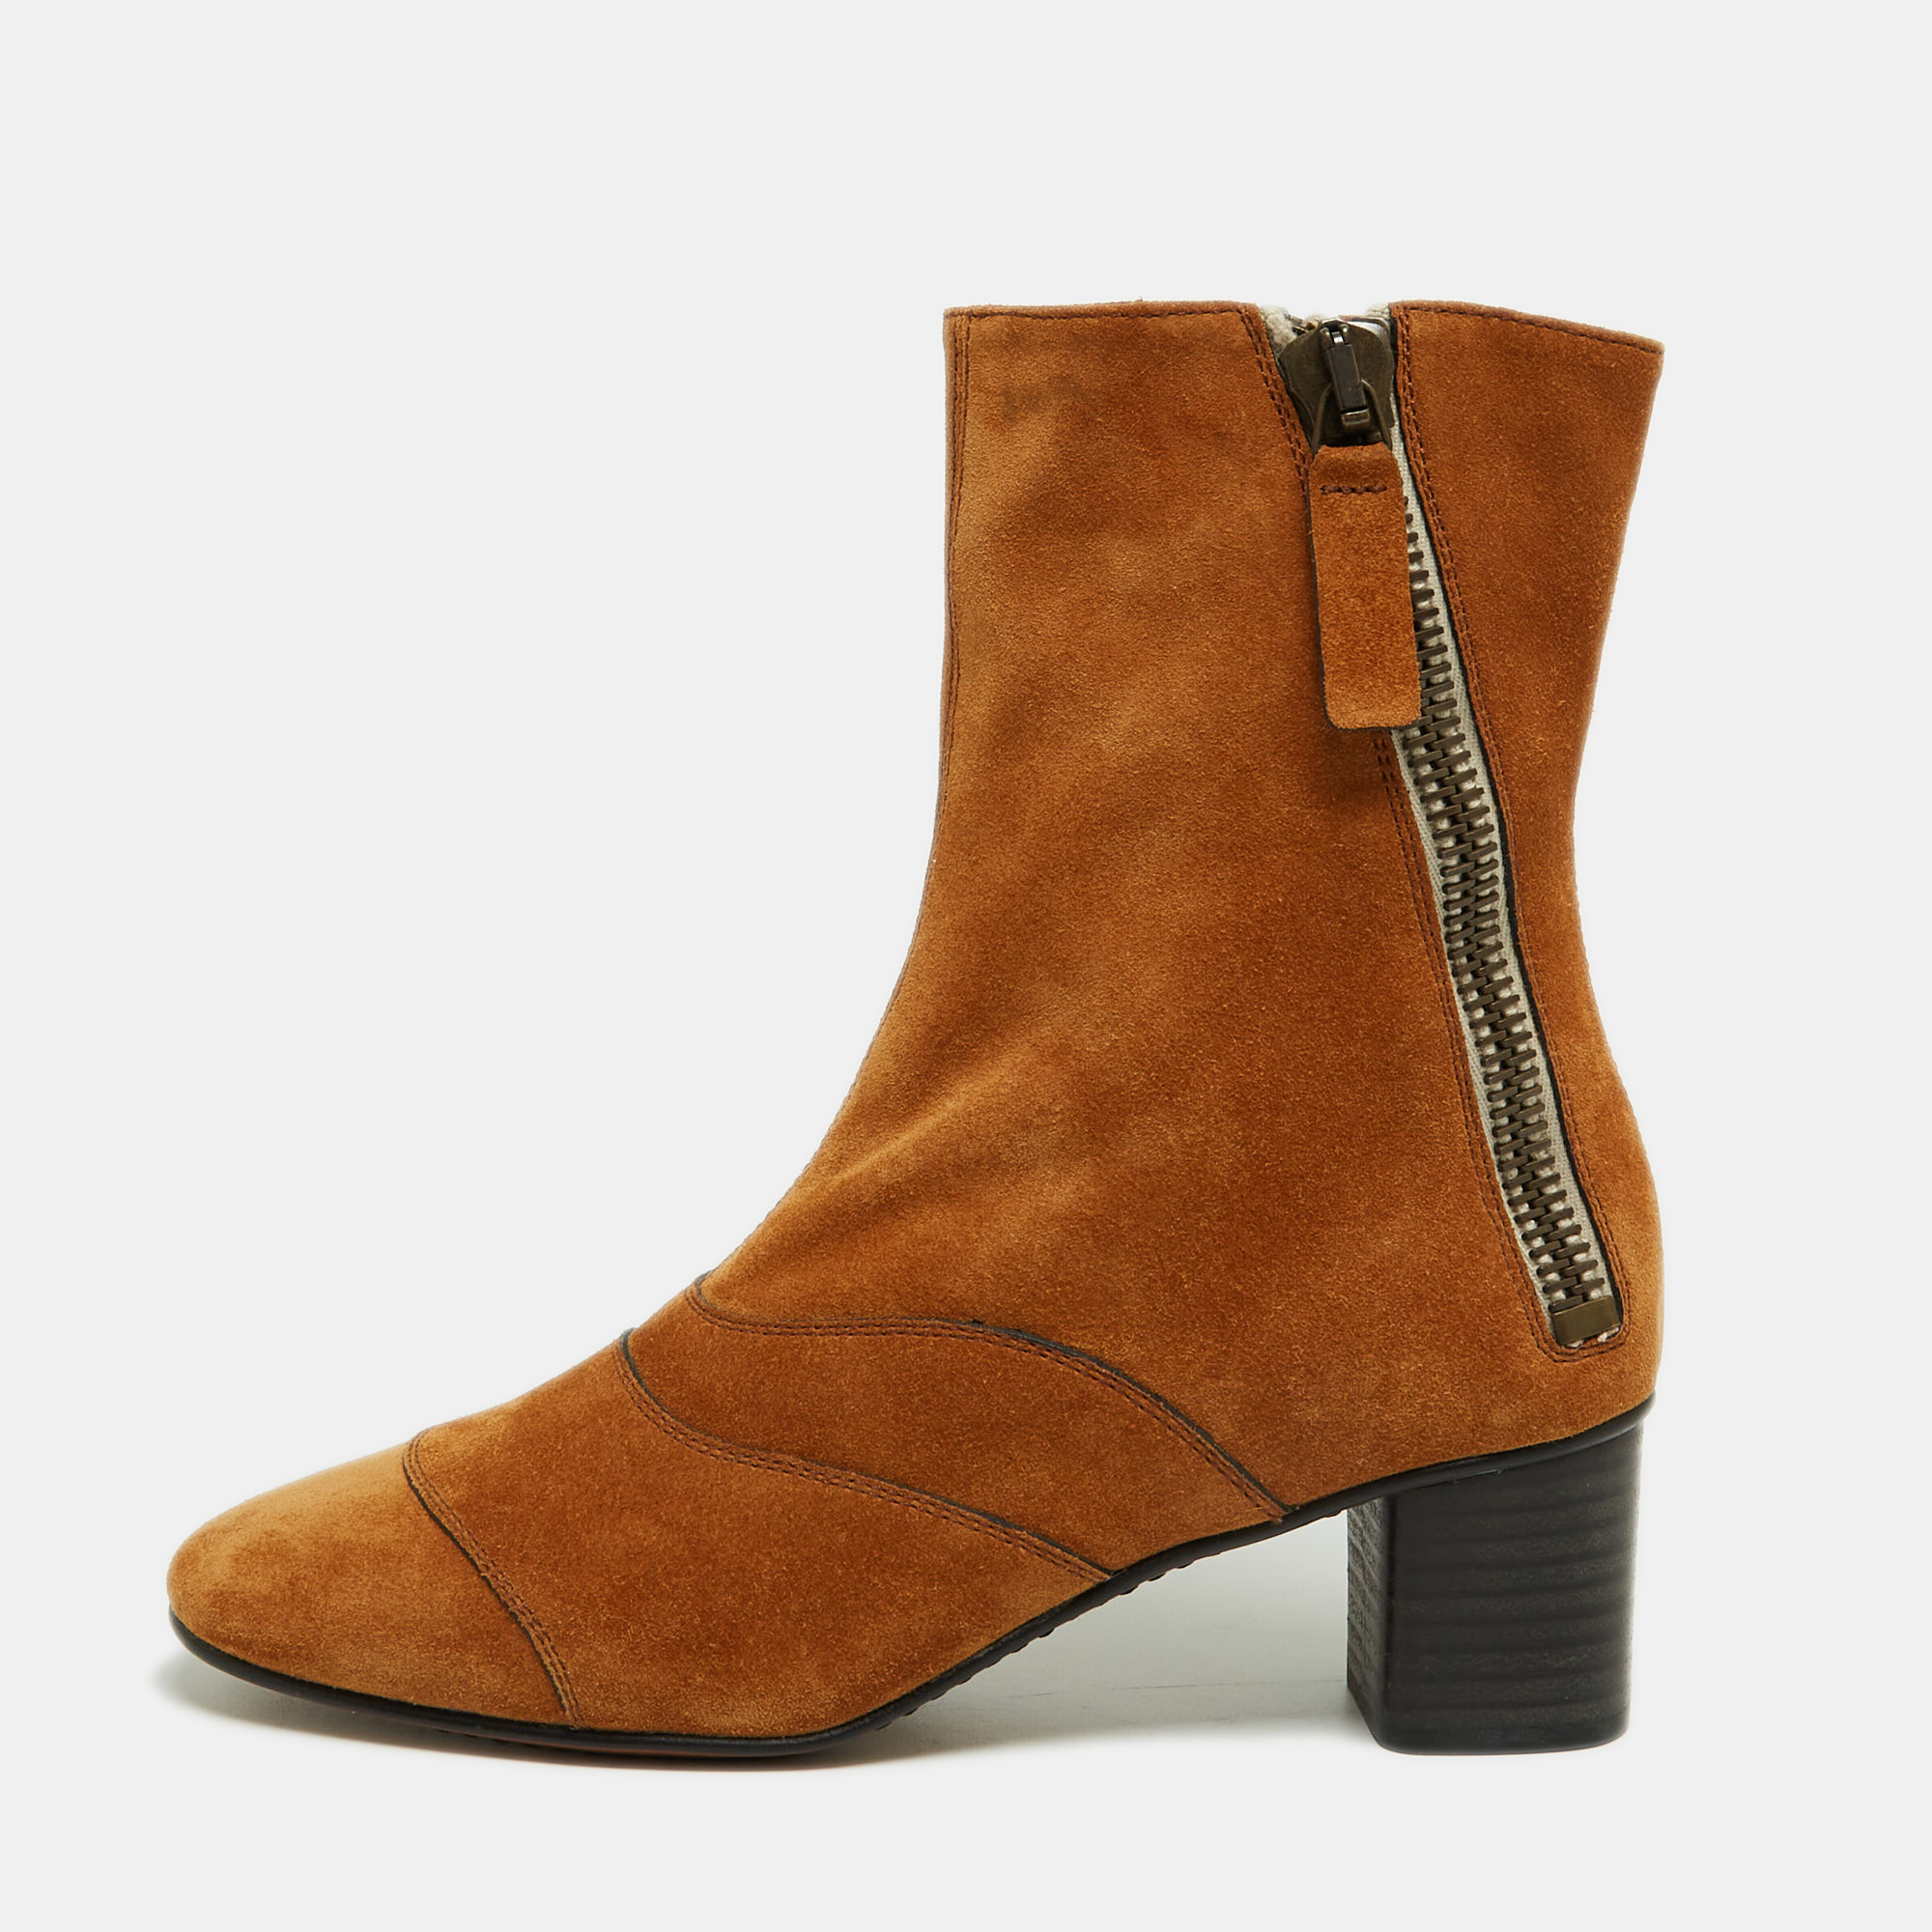 Pre-owned Chloé Brown Suede Ankle Boots Size 36